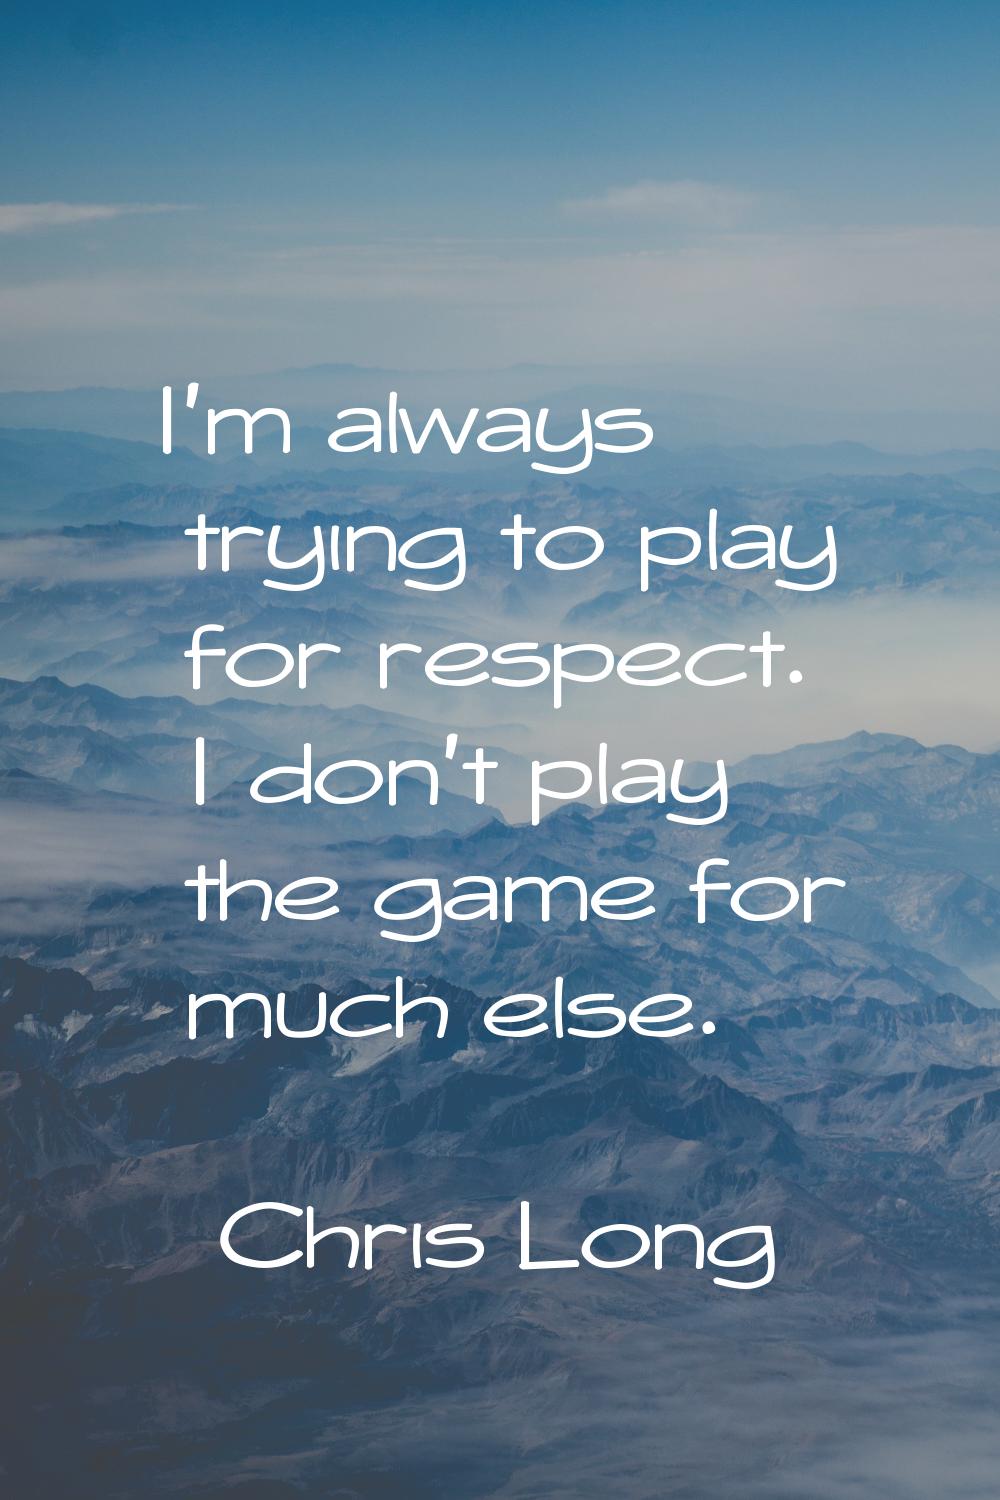 I'm always trying to play for respect. I don't play the game for much else.